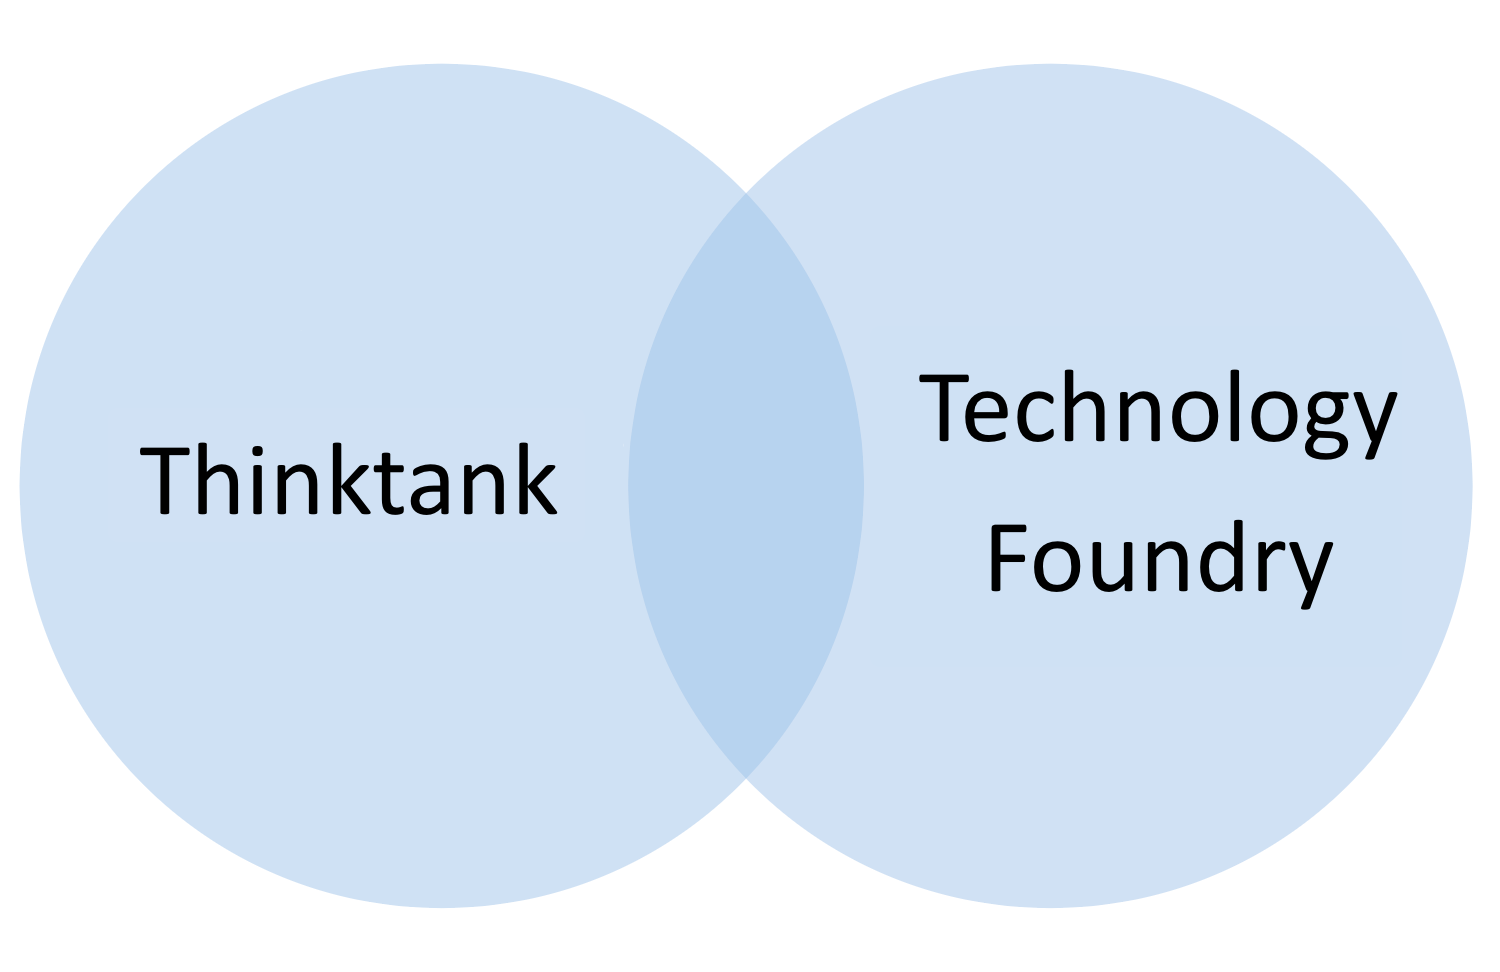 thinktank in one circle overlapping with another circle containing tech foundry